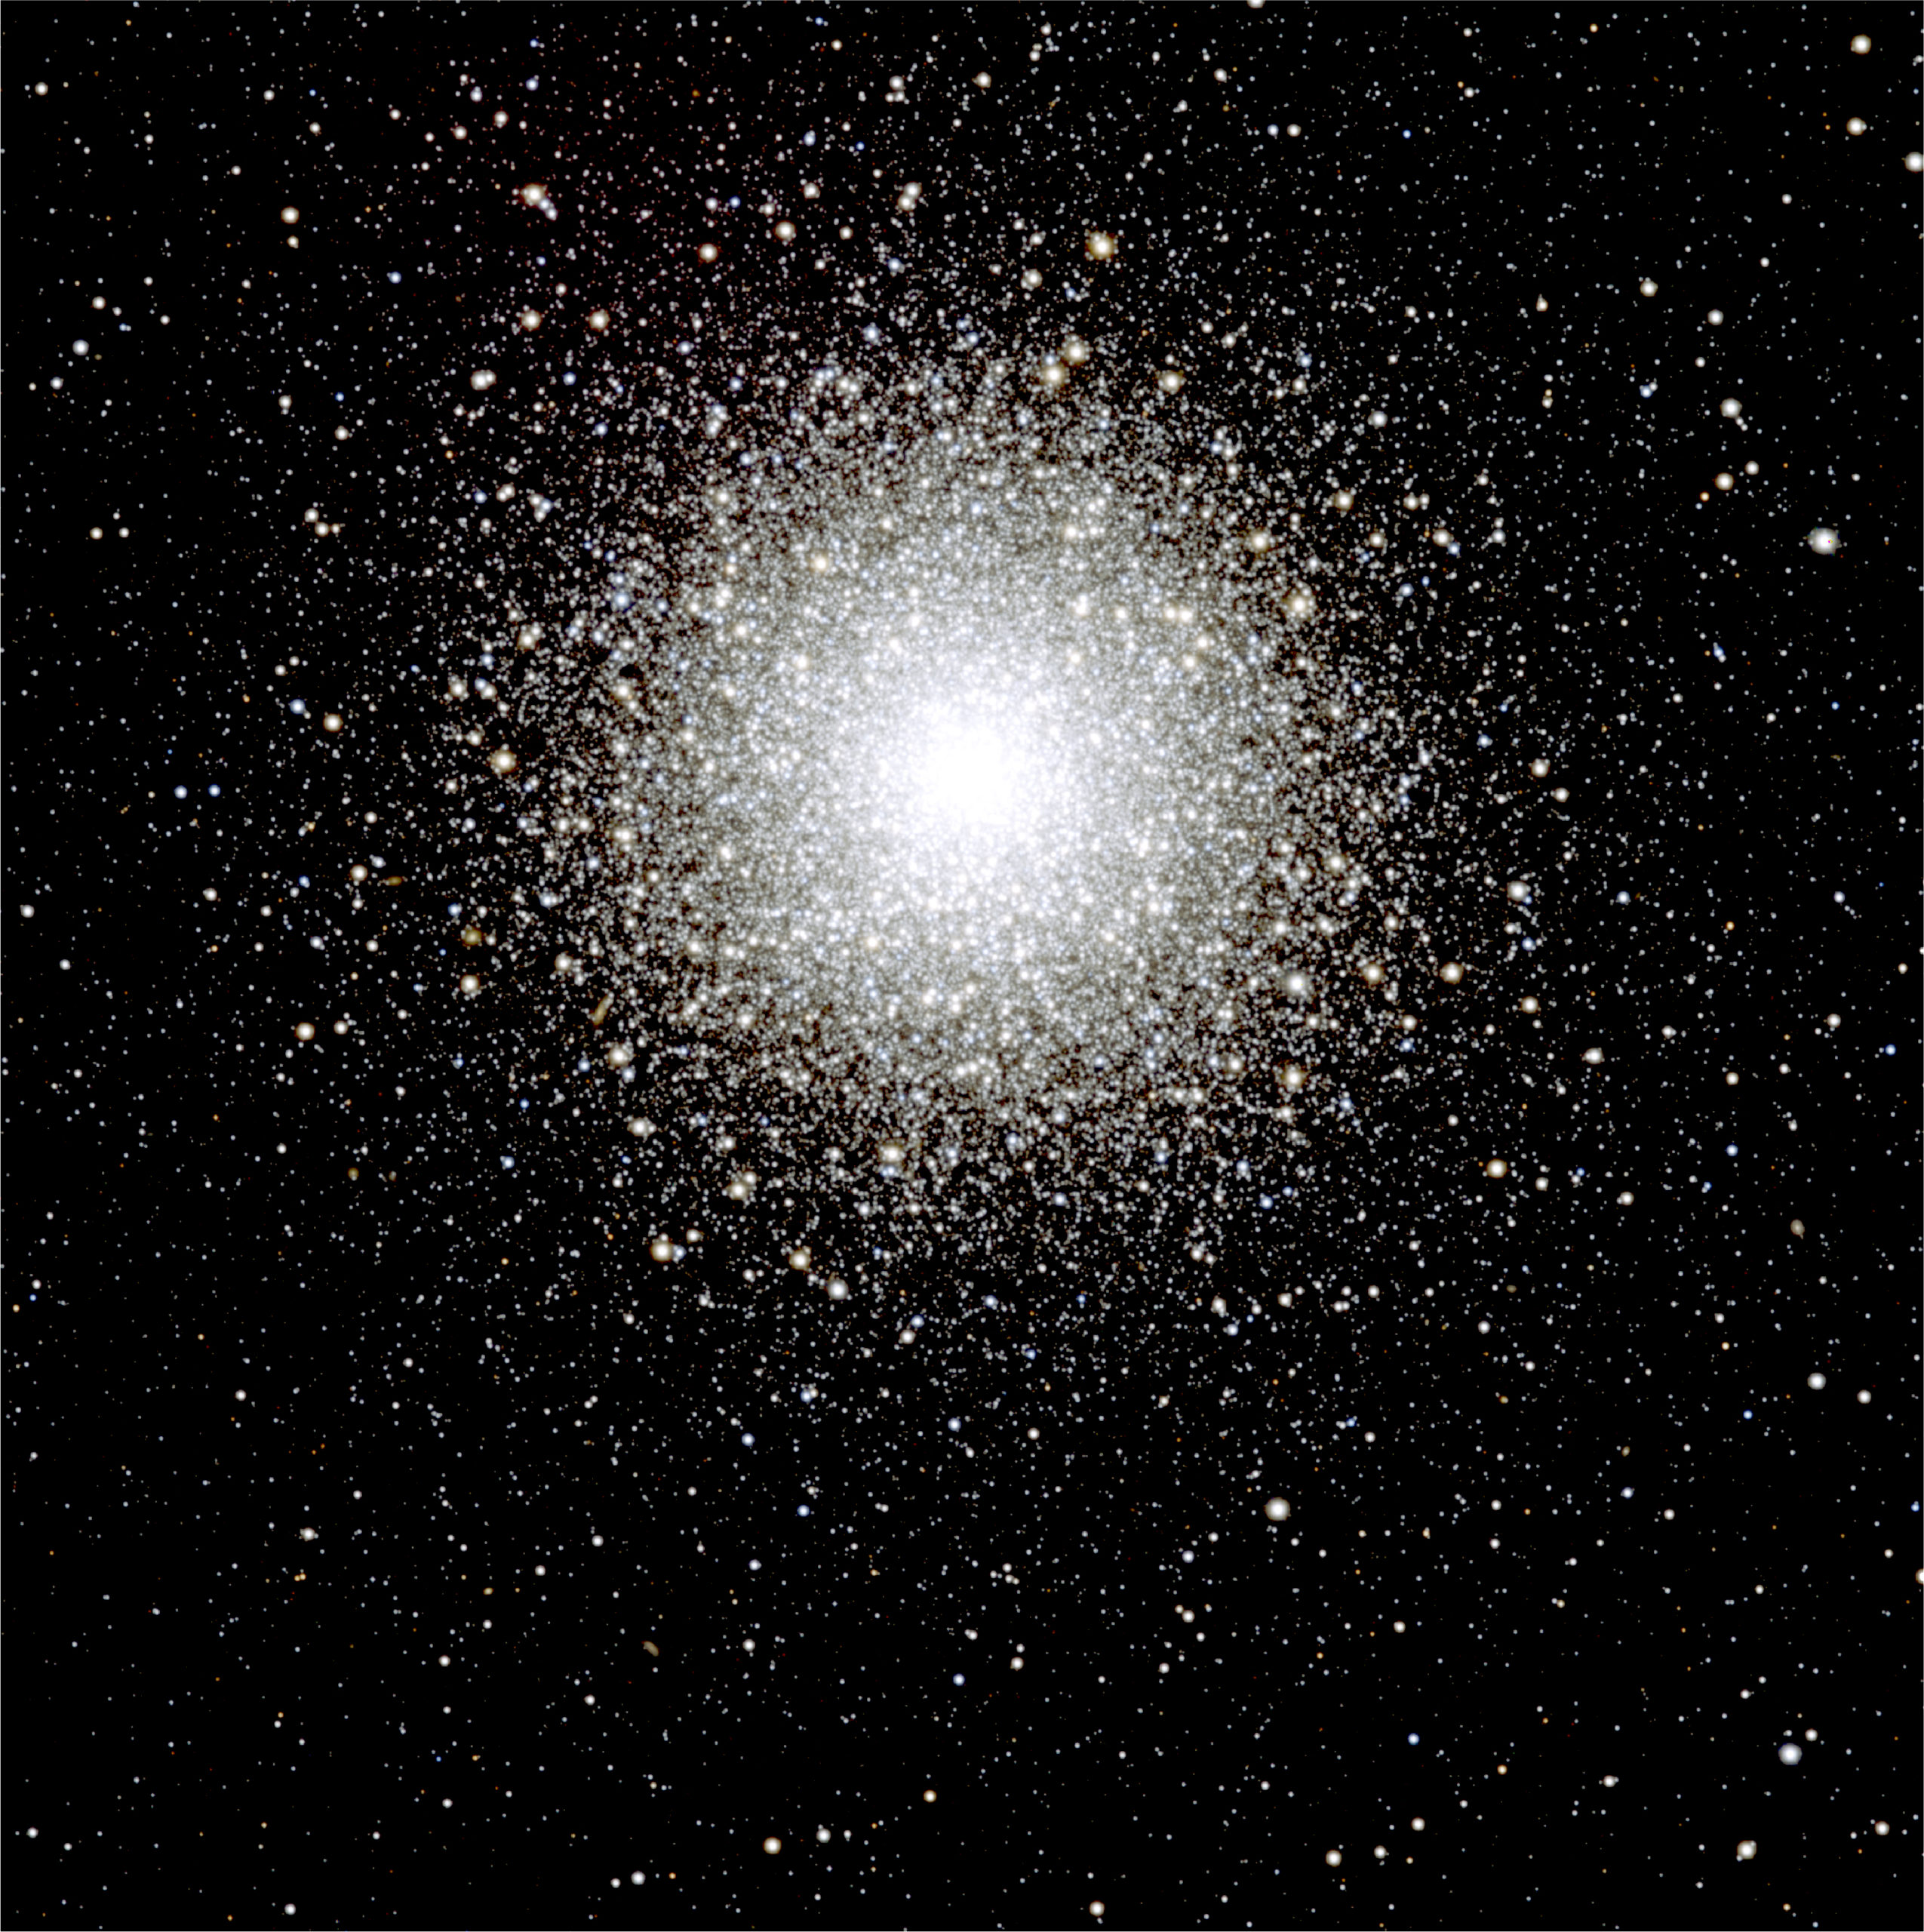 M15. Imaged with Large Monolithic Imager, Lowell Discovery Telescope. Massey/Neugent/Lowell Obs./NSF